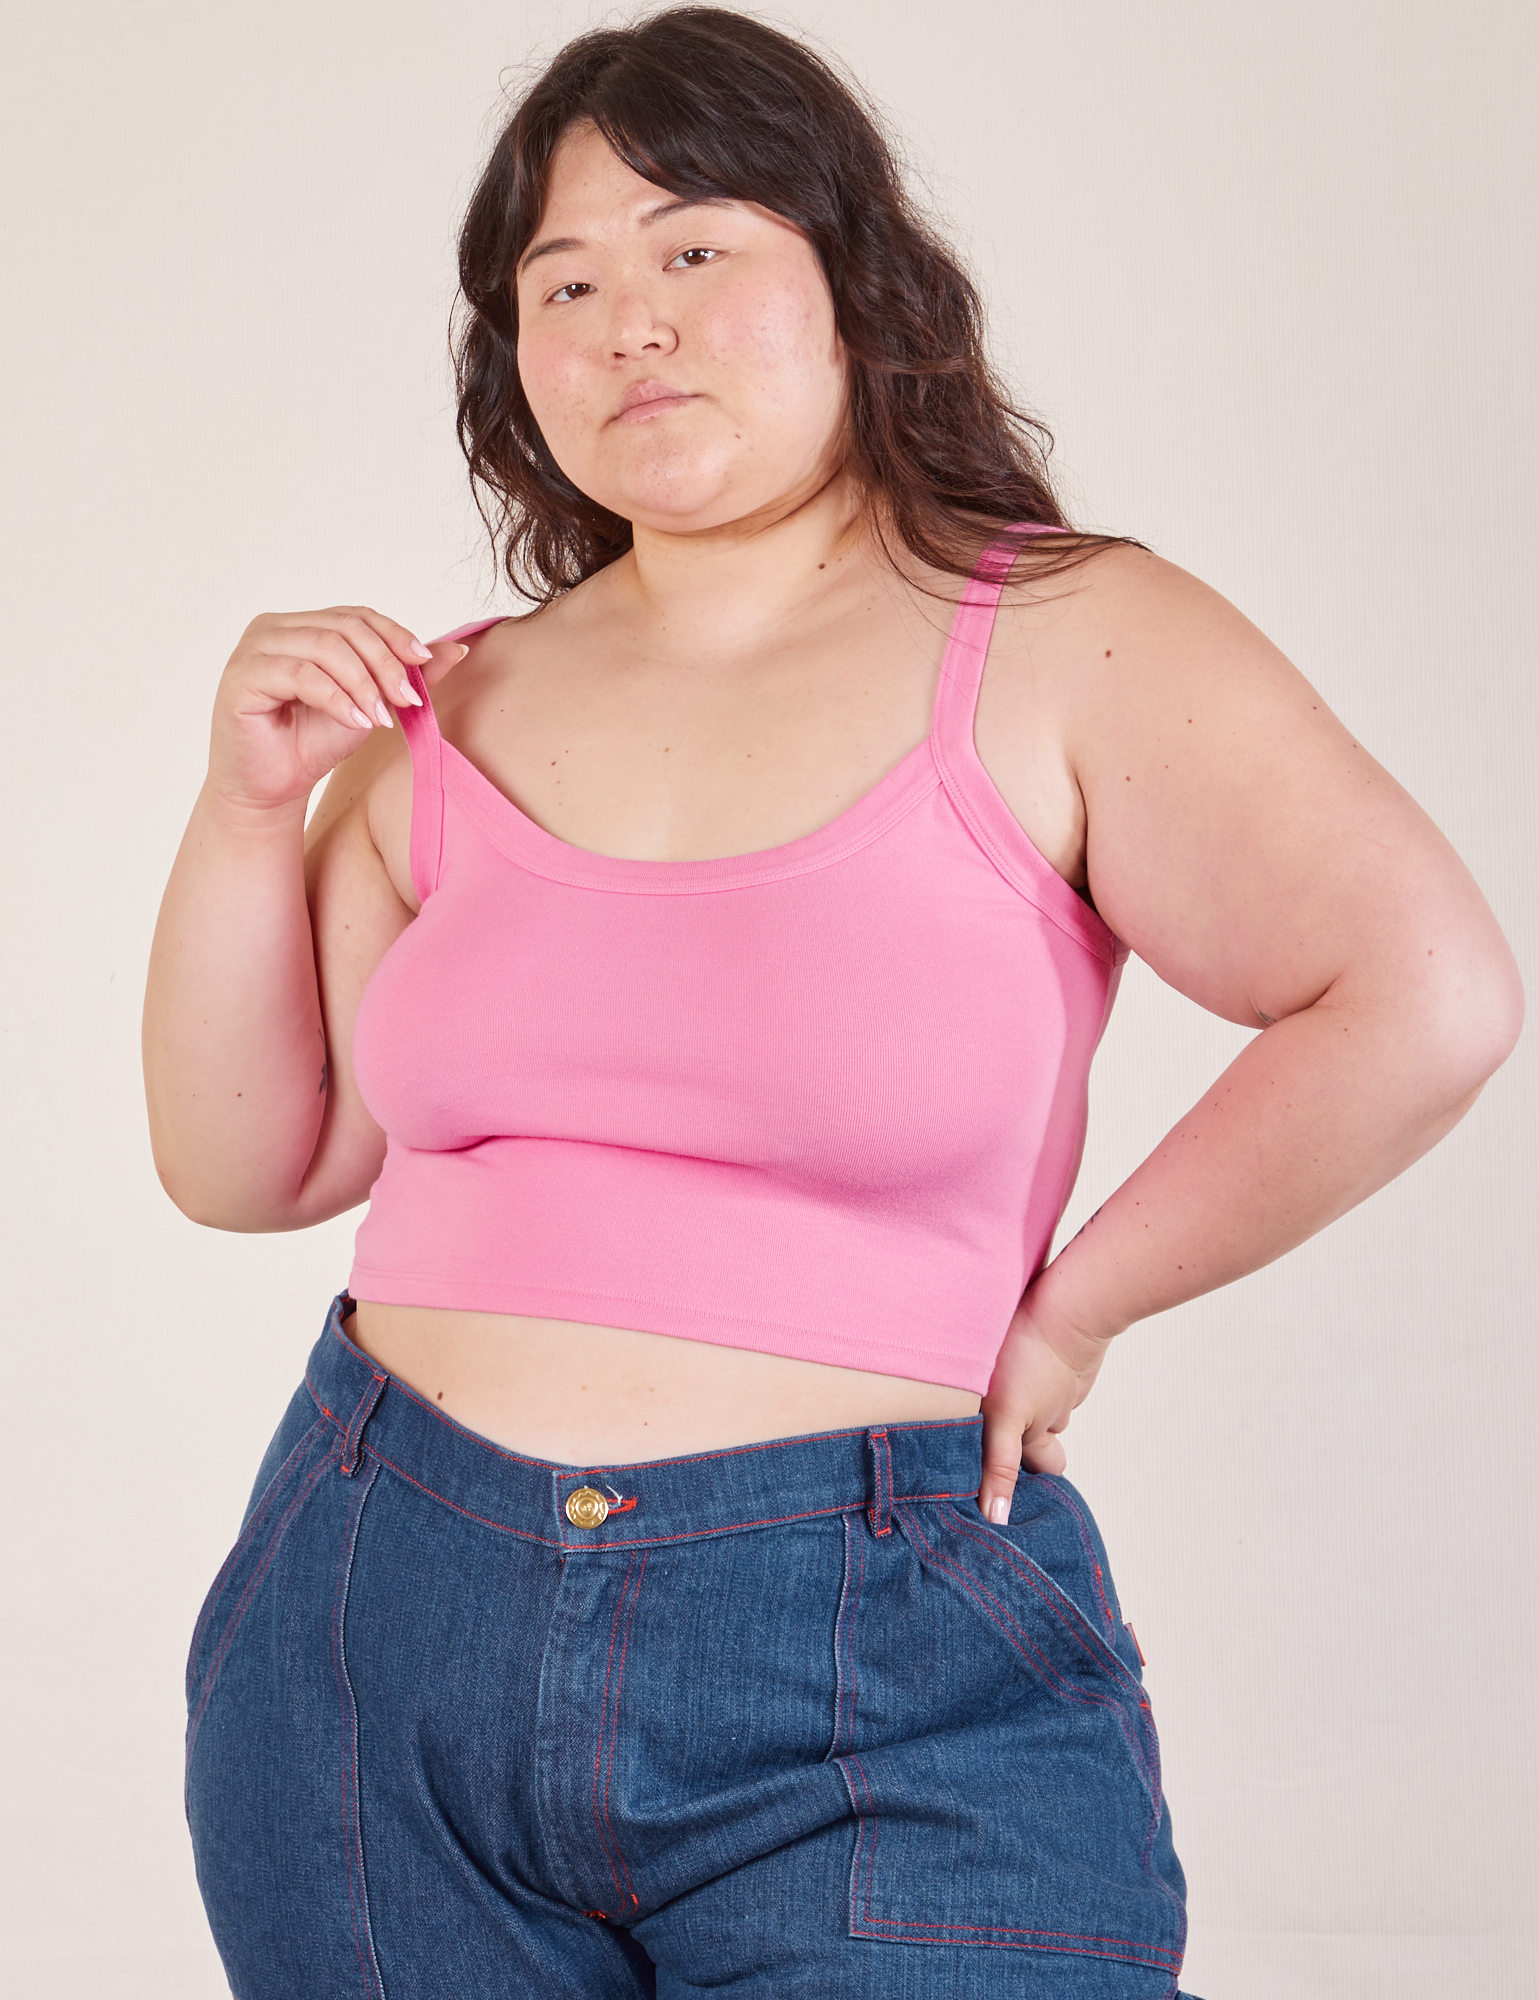 Ashley is 5’7” and wearing L Cropped Cami in Bubblegum Pink